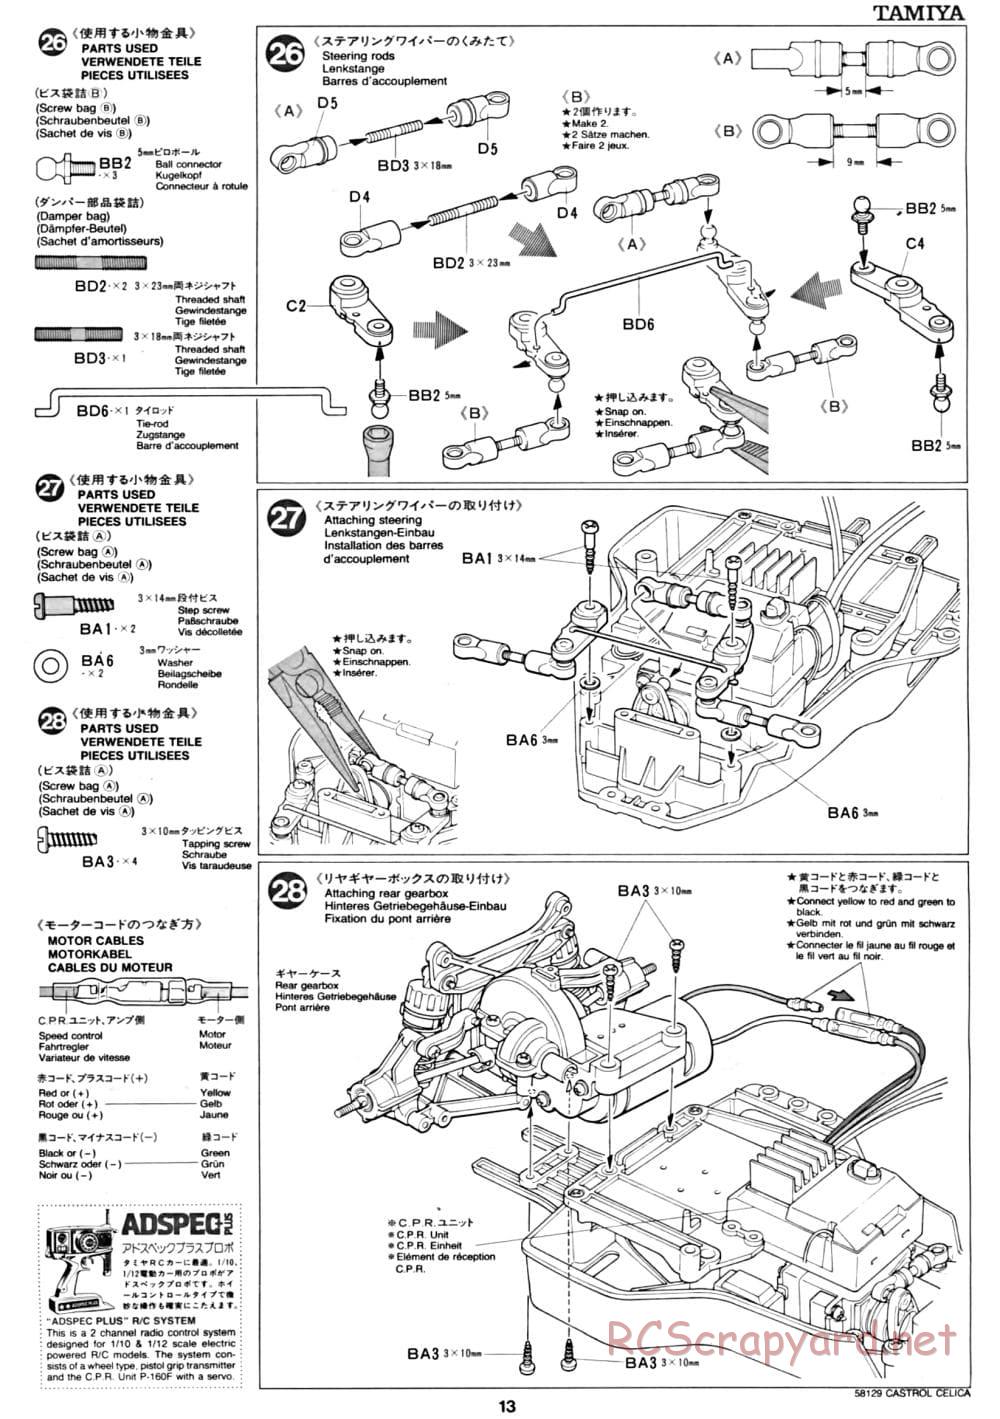 Tamiya - Castrol Celica 93 Monte-Carlo - TA-02 Chassis - Manual - Page 13